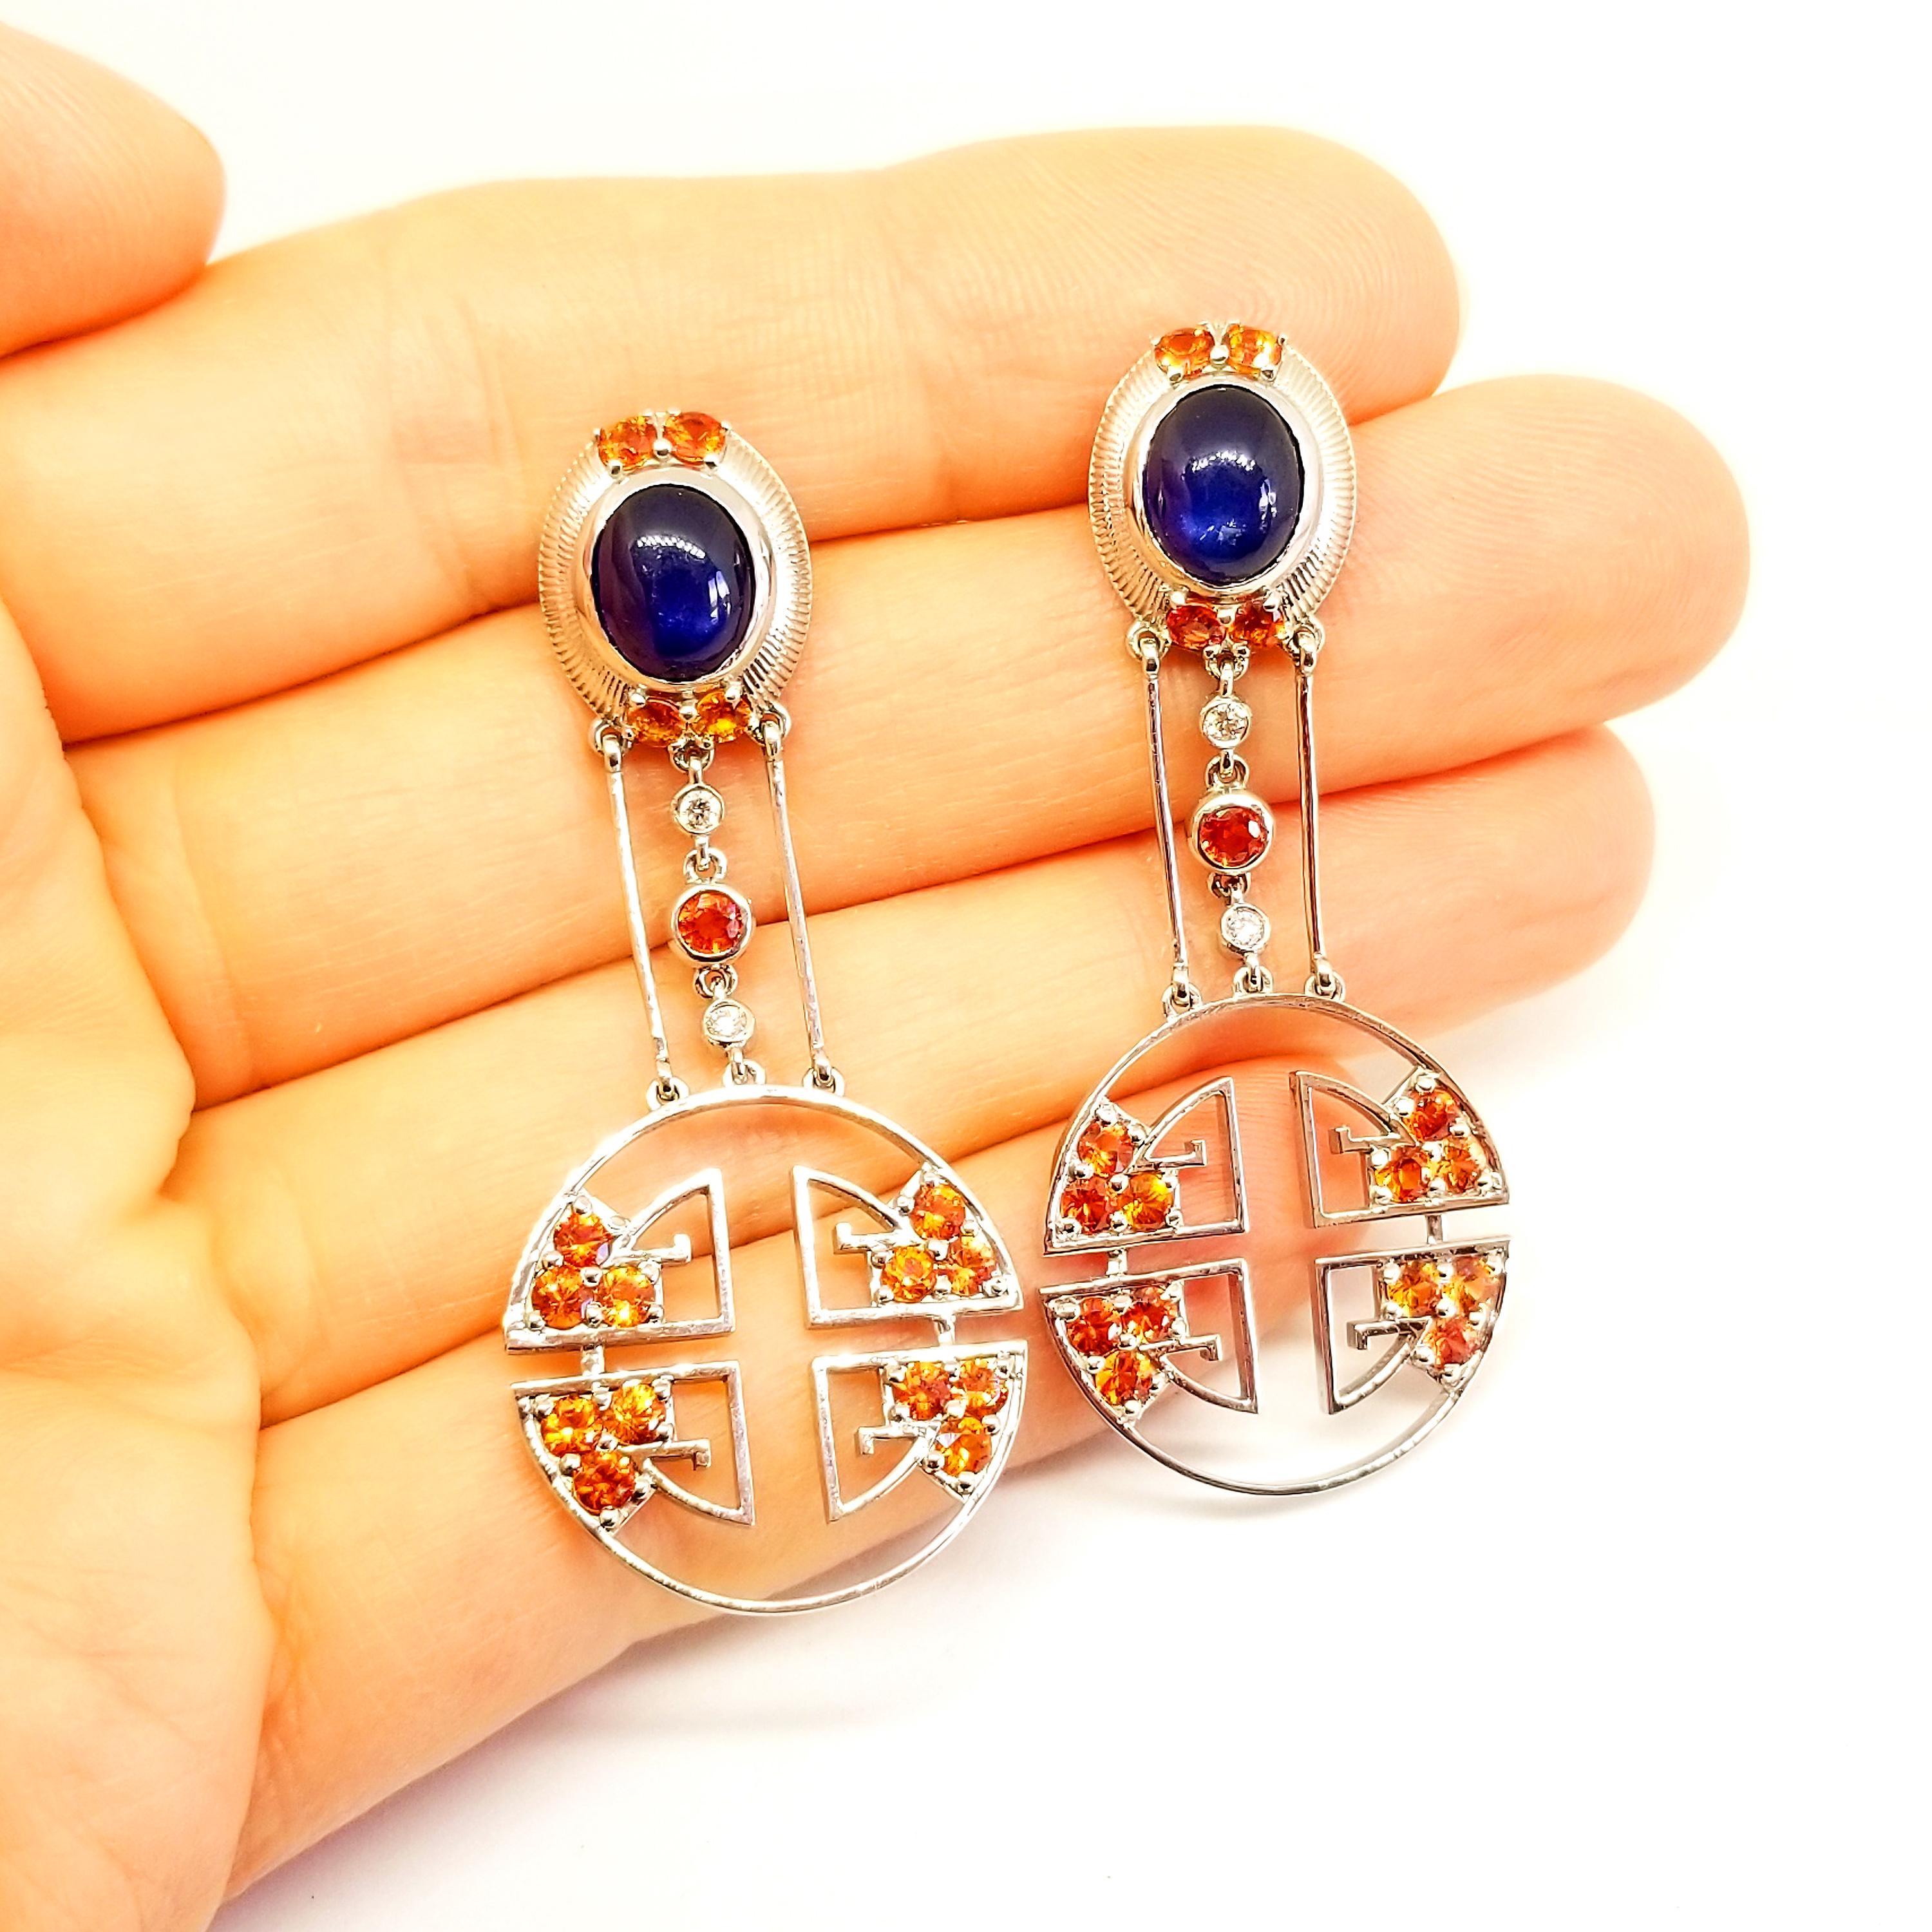 These Custom Designed and Crafted Earrings are One of a Kind and feature the Lu Riches, or Good Fortune of Oriental Deco Style. The Earrings boast a matched pair of Cabochon, Rich Medium Blue hue, Sapphire ovals at the ear. The two Gem Quality